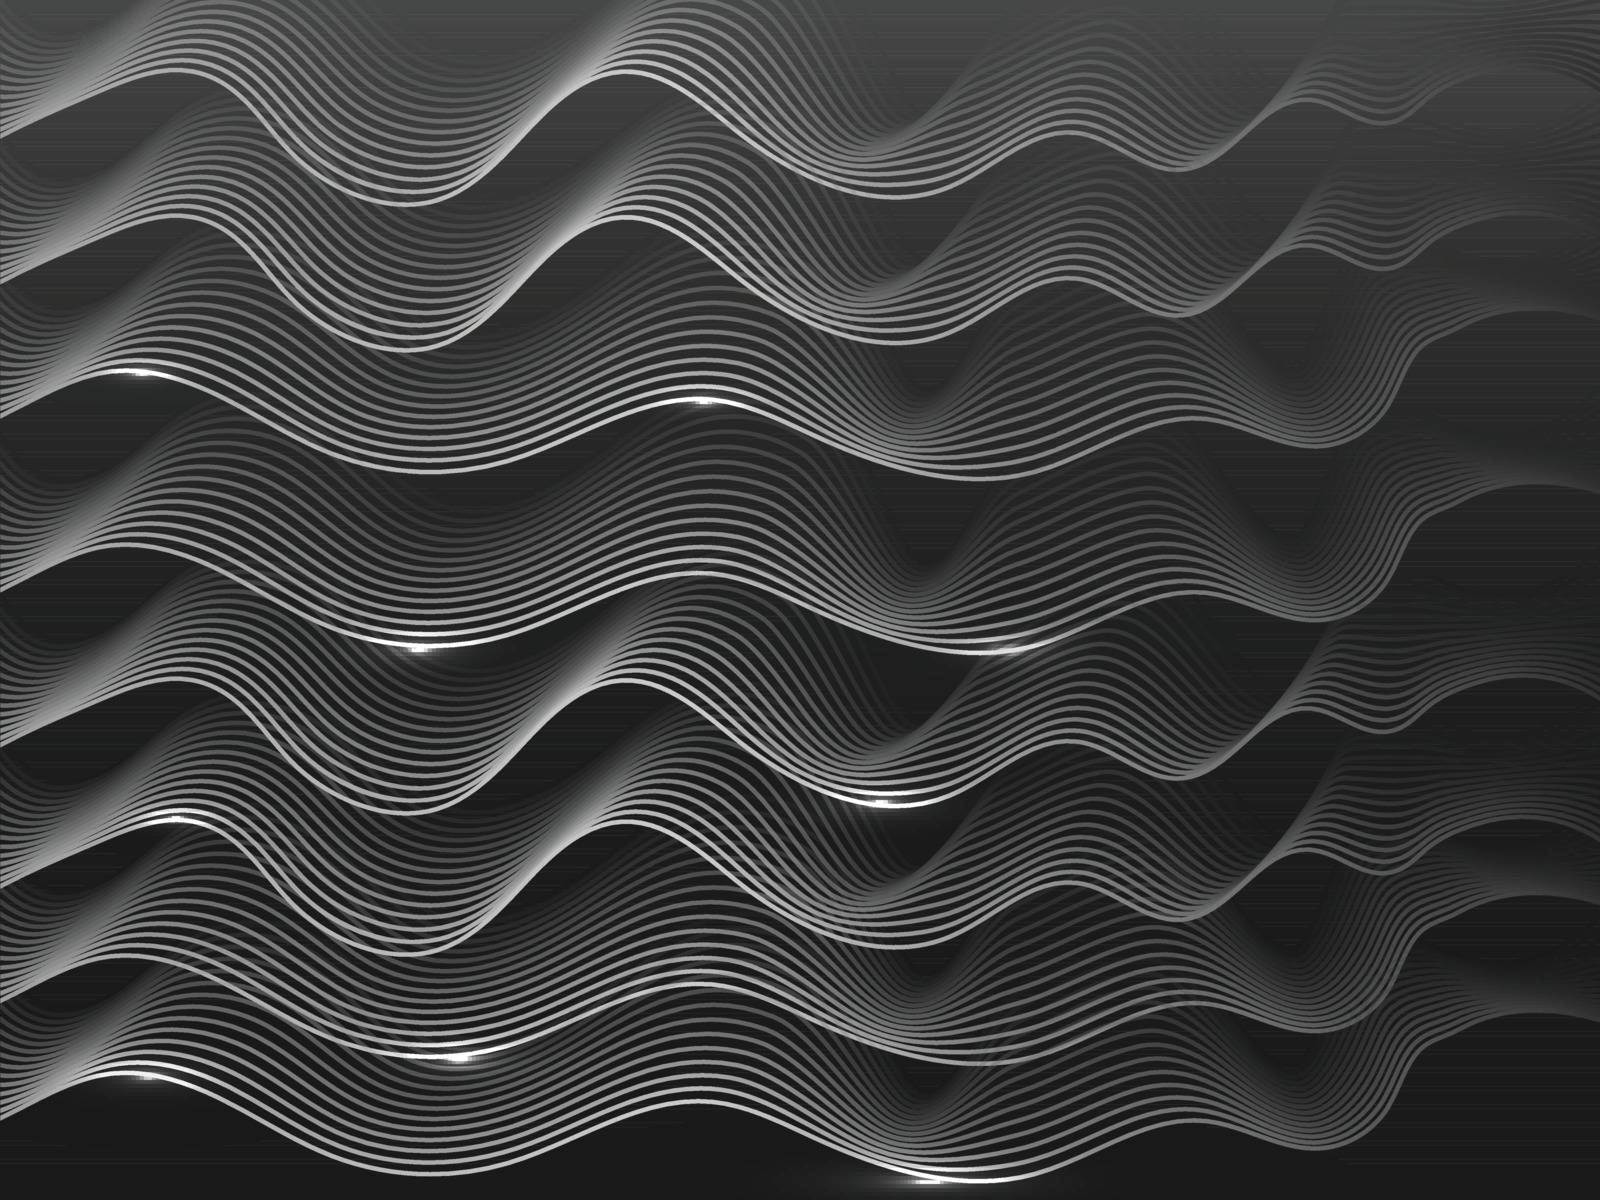 Animations of wave motion from particle field dance motion backg by aispl